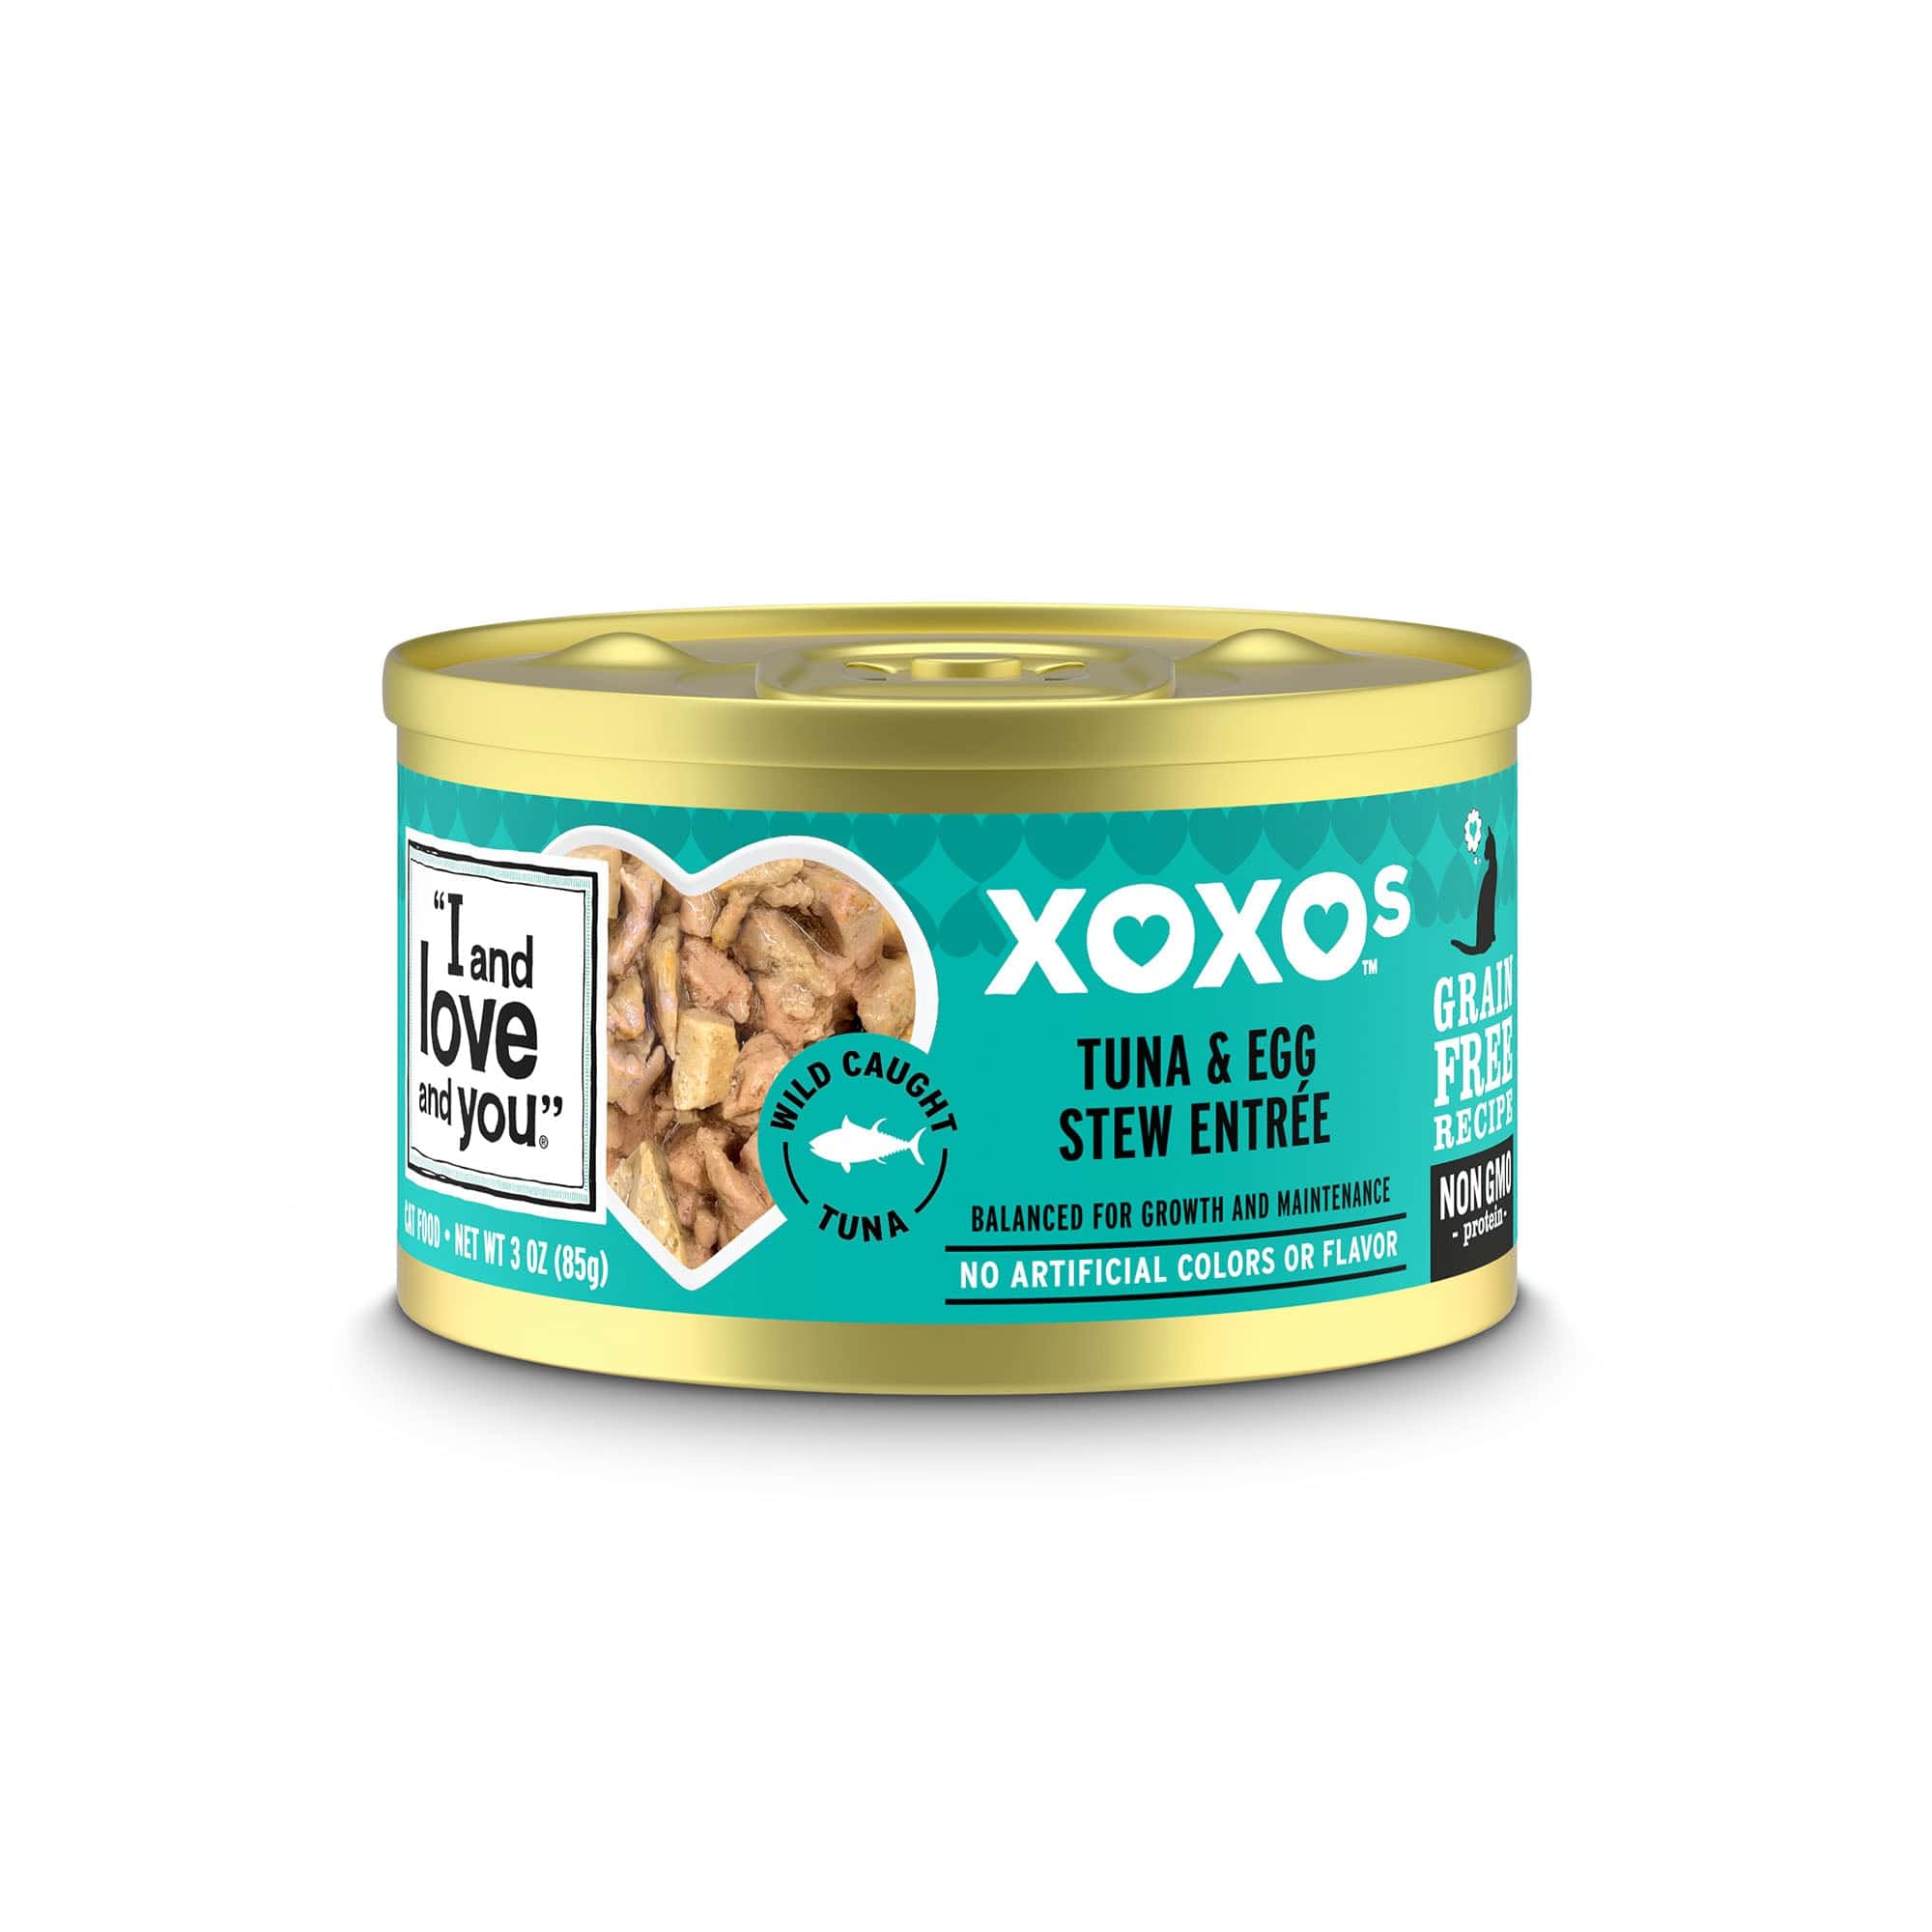 A can of XOXOs Tuna & Egg Stew with a label featuring a fish logo and text.